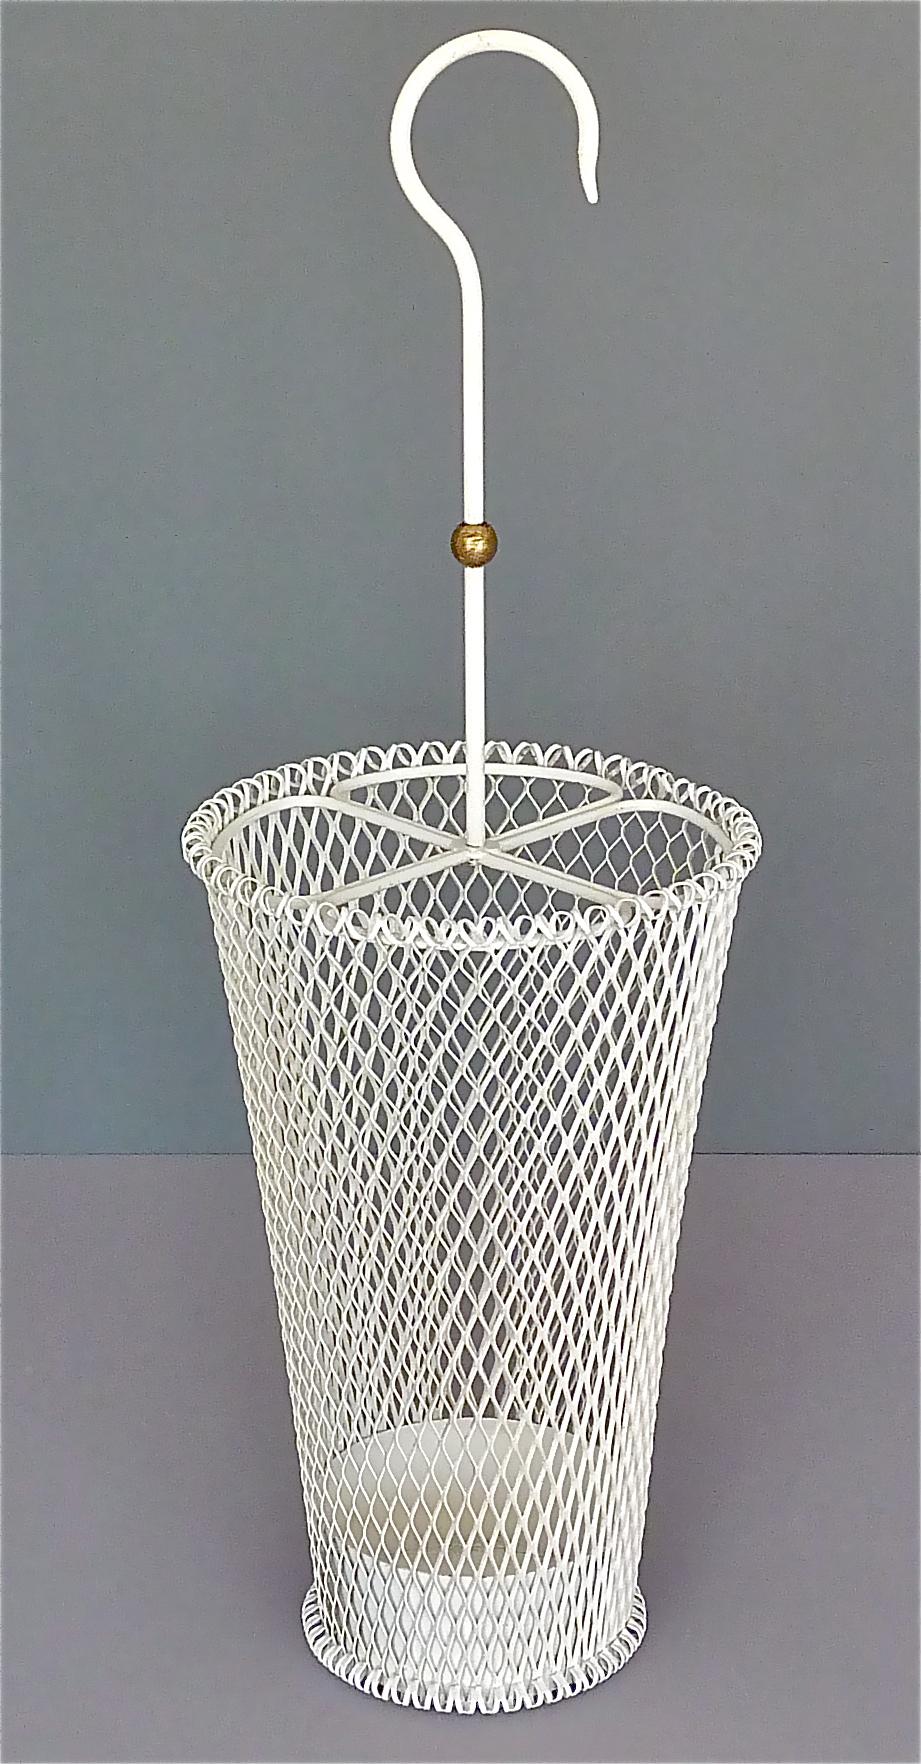 Elegant midcentury umbrella stand in the style of Mathieu Matégot, Jacques Biny or Pierre Guariche, France, circa 1955. It has a white enameled stretched metal body and a simple and chic white enameled iron handle with a nice patinated brass detail.